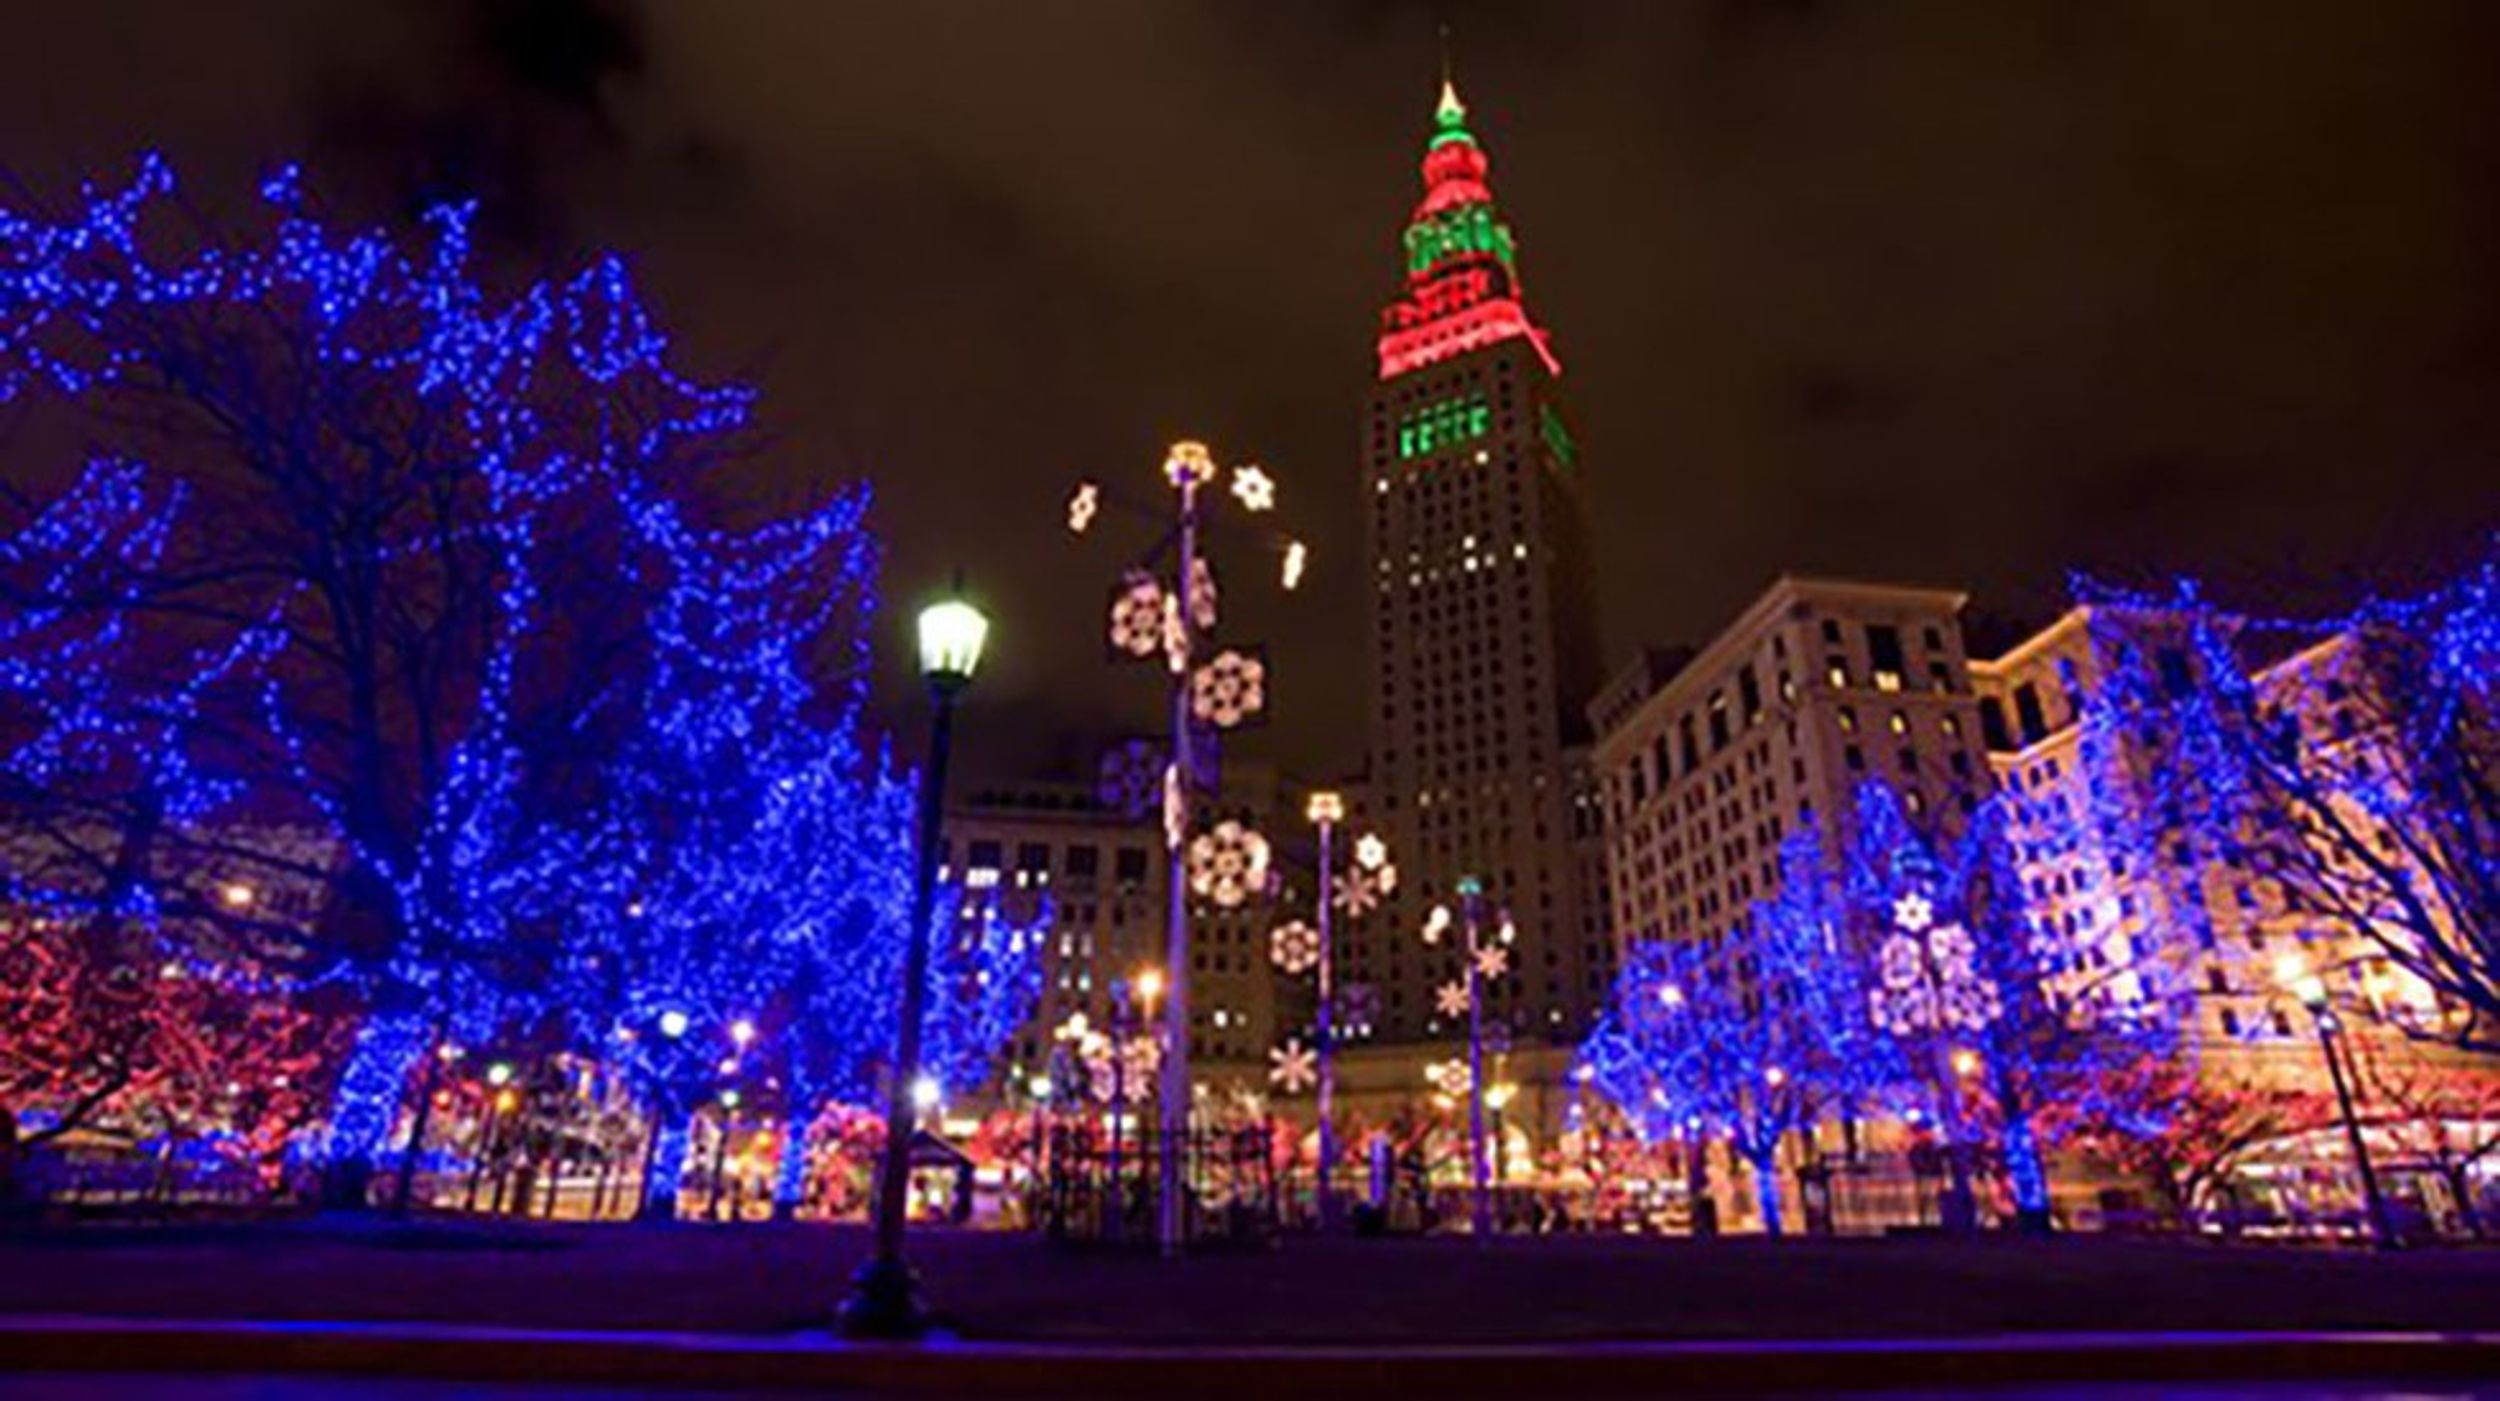 Fun Things To Do Over the Holidays In Cleveland